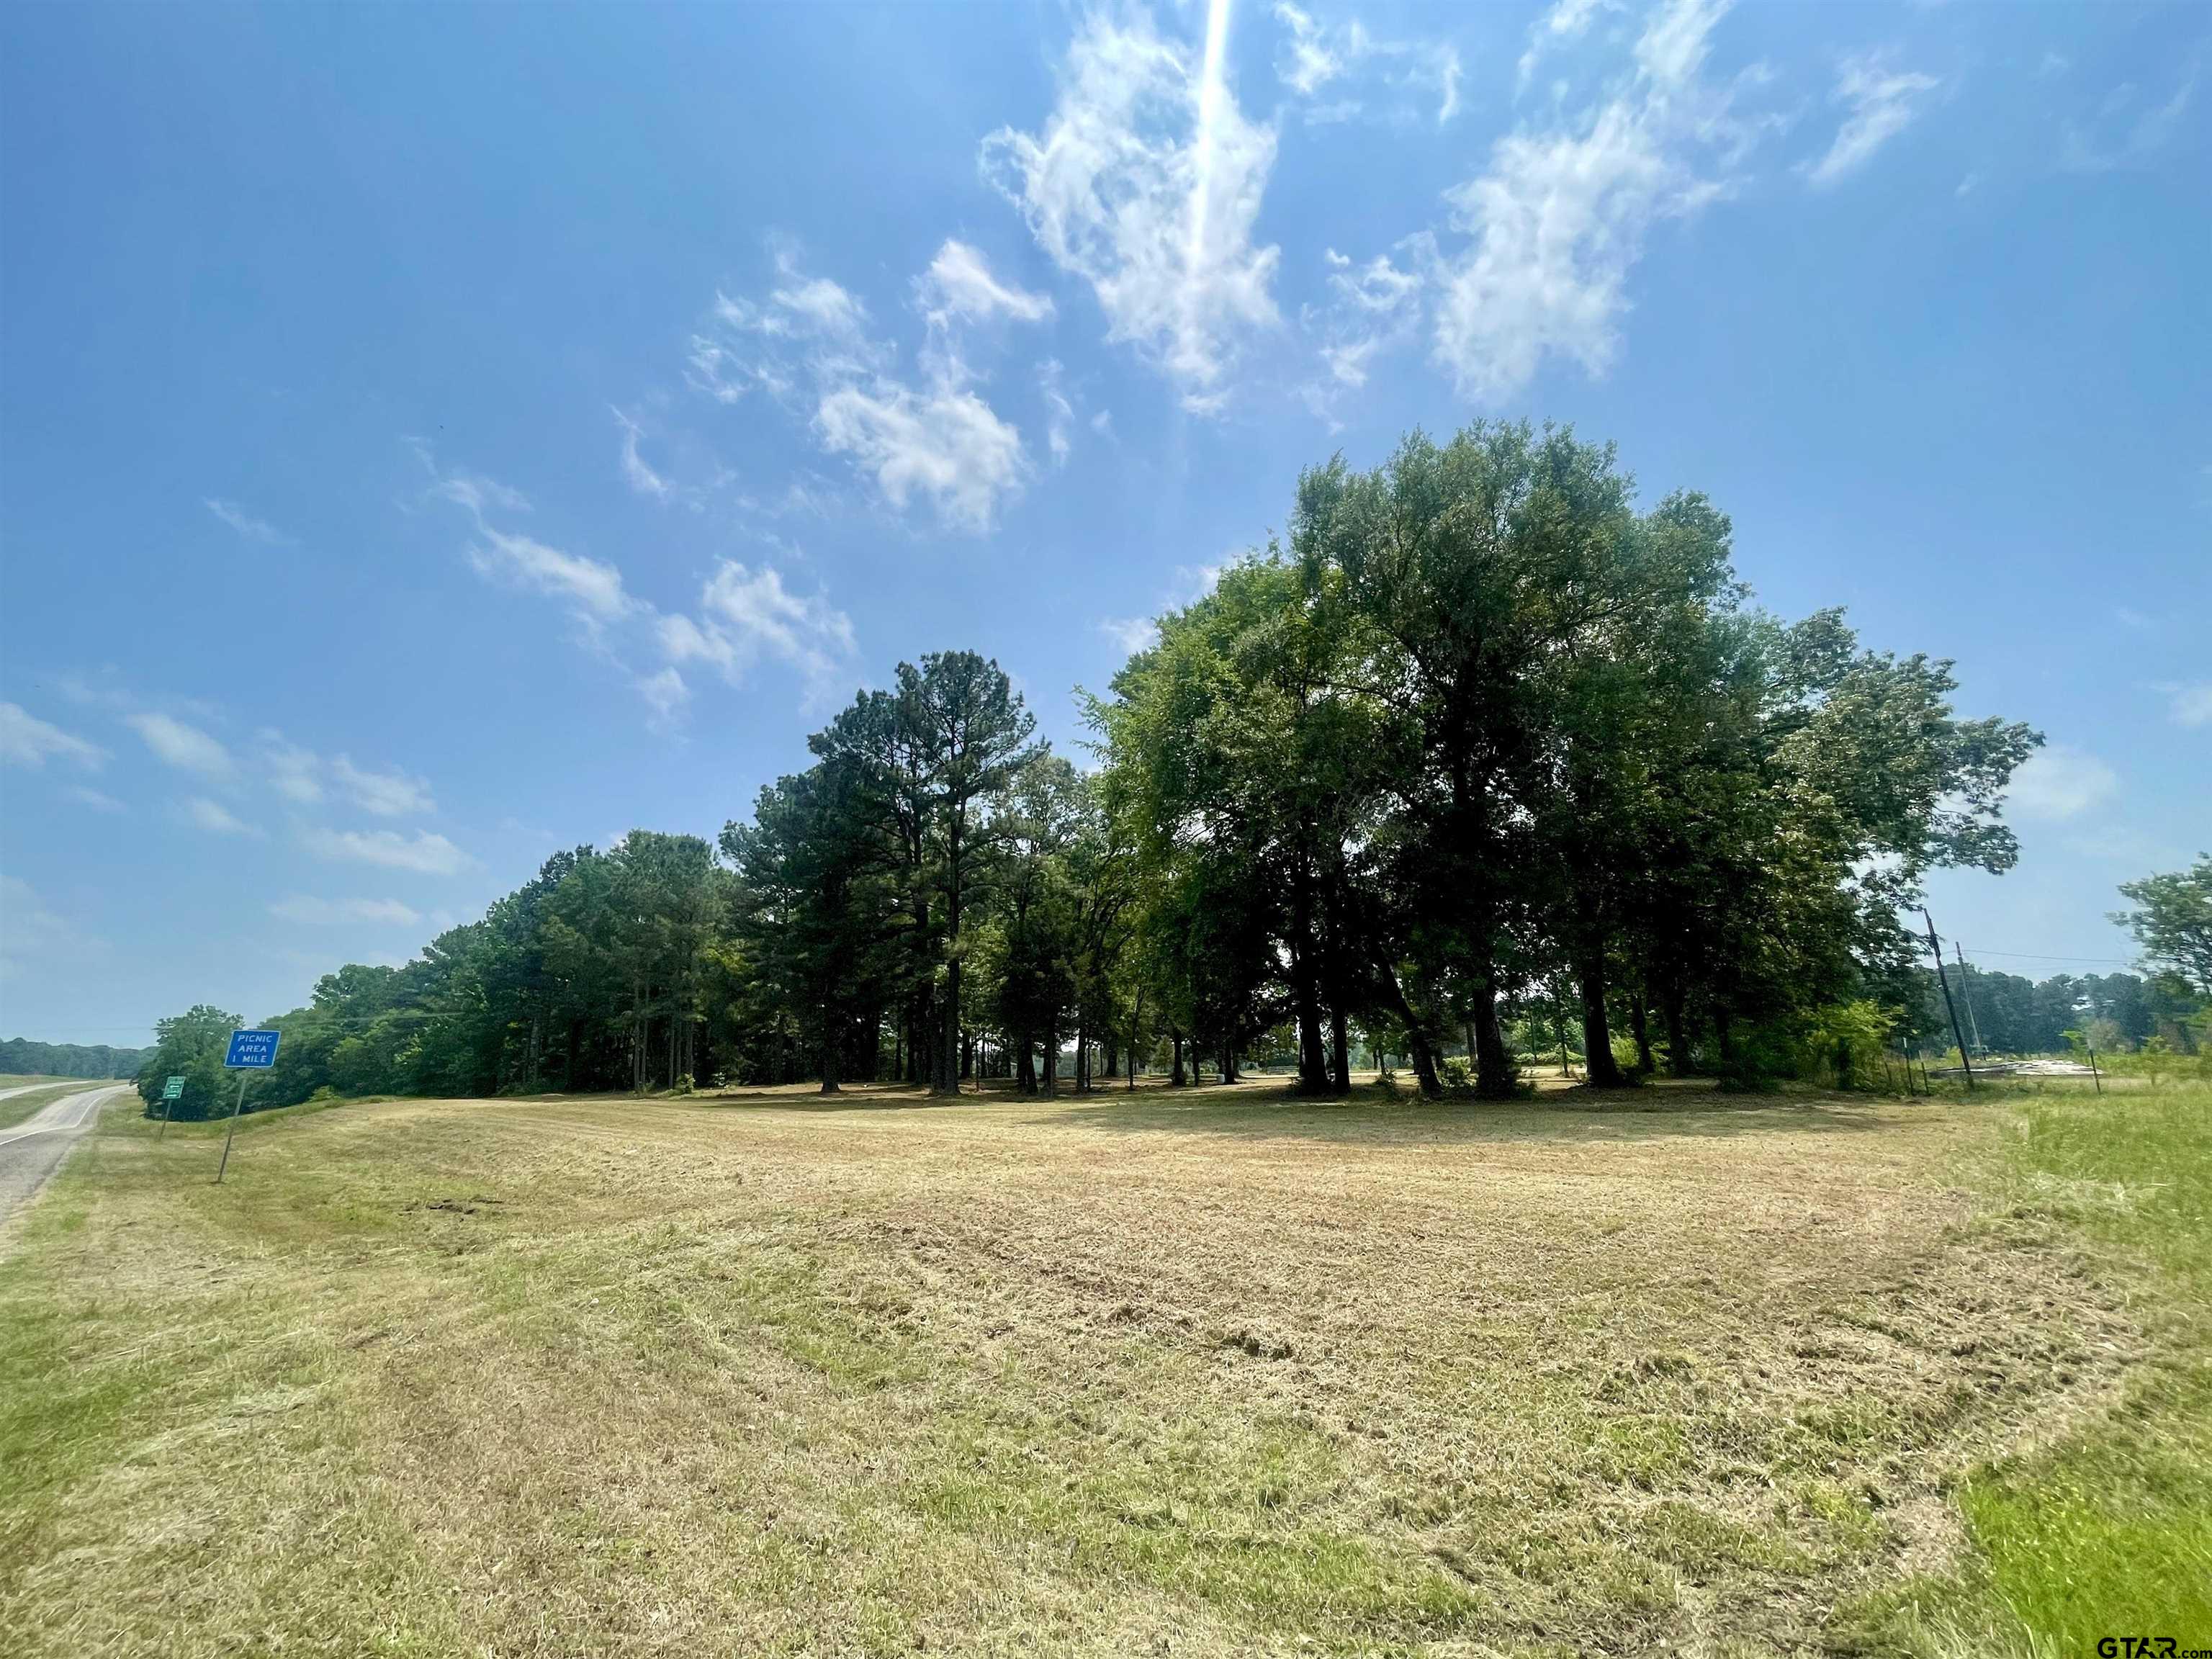 Come build your dream house on this 1.6 acre tract right off of HWY 80 and only 2.5 miles away from Hawkins ISD! Unrestricted land with road access to CR 3340 and HWY 80. Property is fully set up already with Electric and Water meter.  These are costly expenses already set up and ready for a new property owner. The location is perfect for a little bit of acreage outside of town. Mature hard woods throughout the property offer the perfect amount of privacy and shade needed. Call for your private showing today!